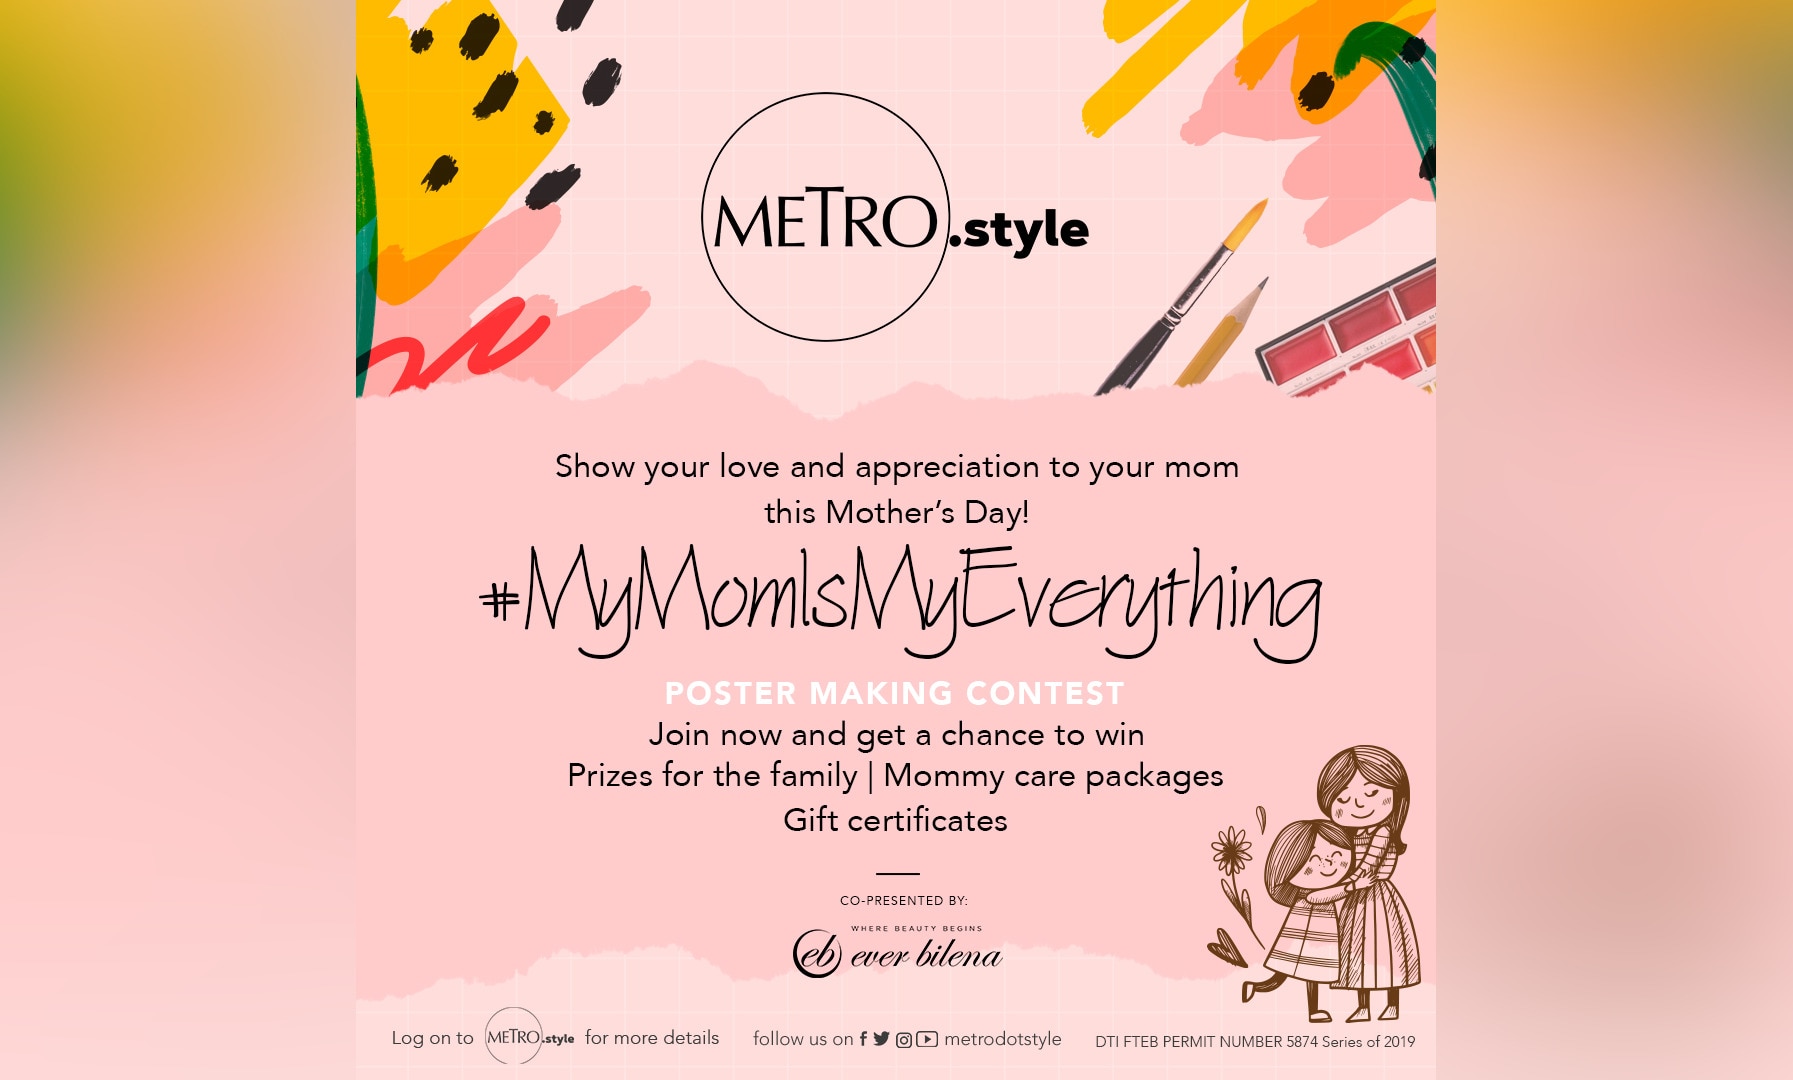 Kids get to show their love in Metro.Style's "My Mom Is My Everything" promo